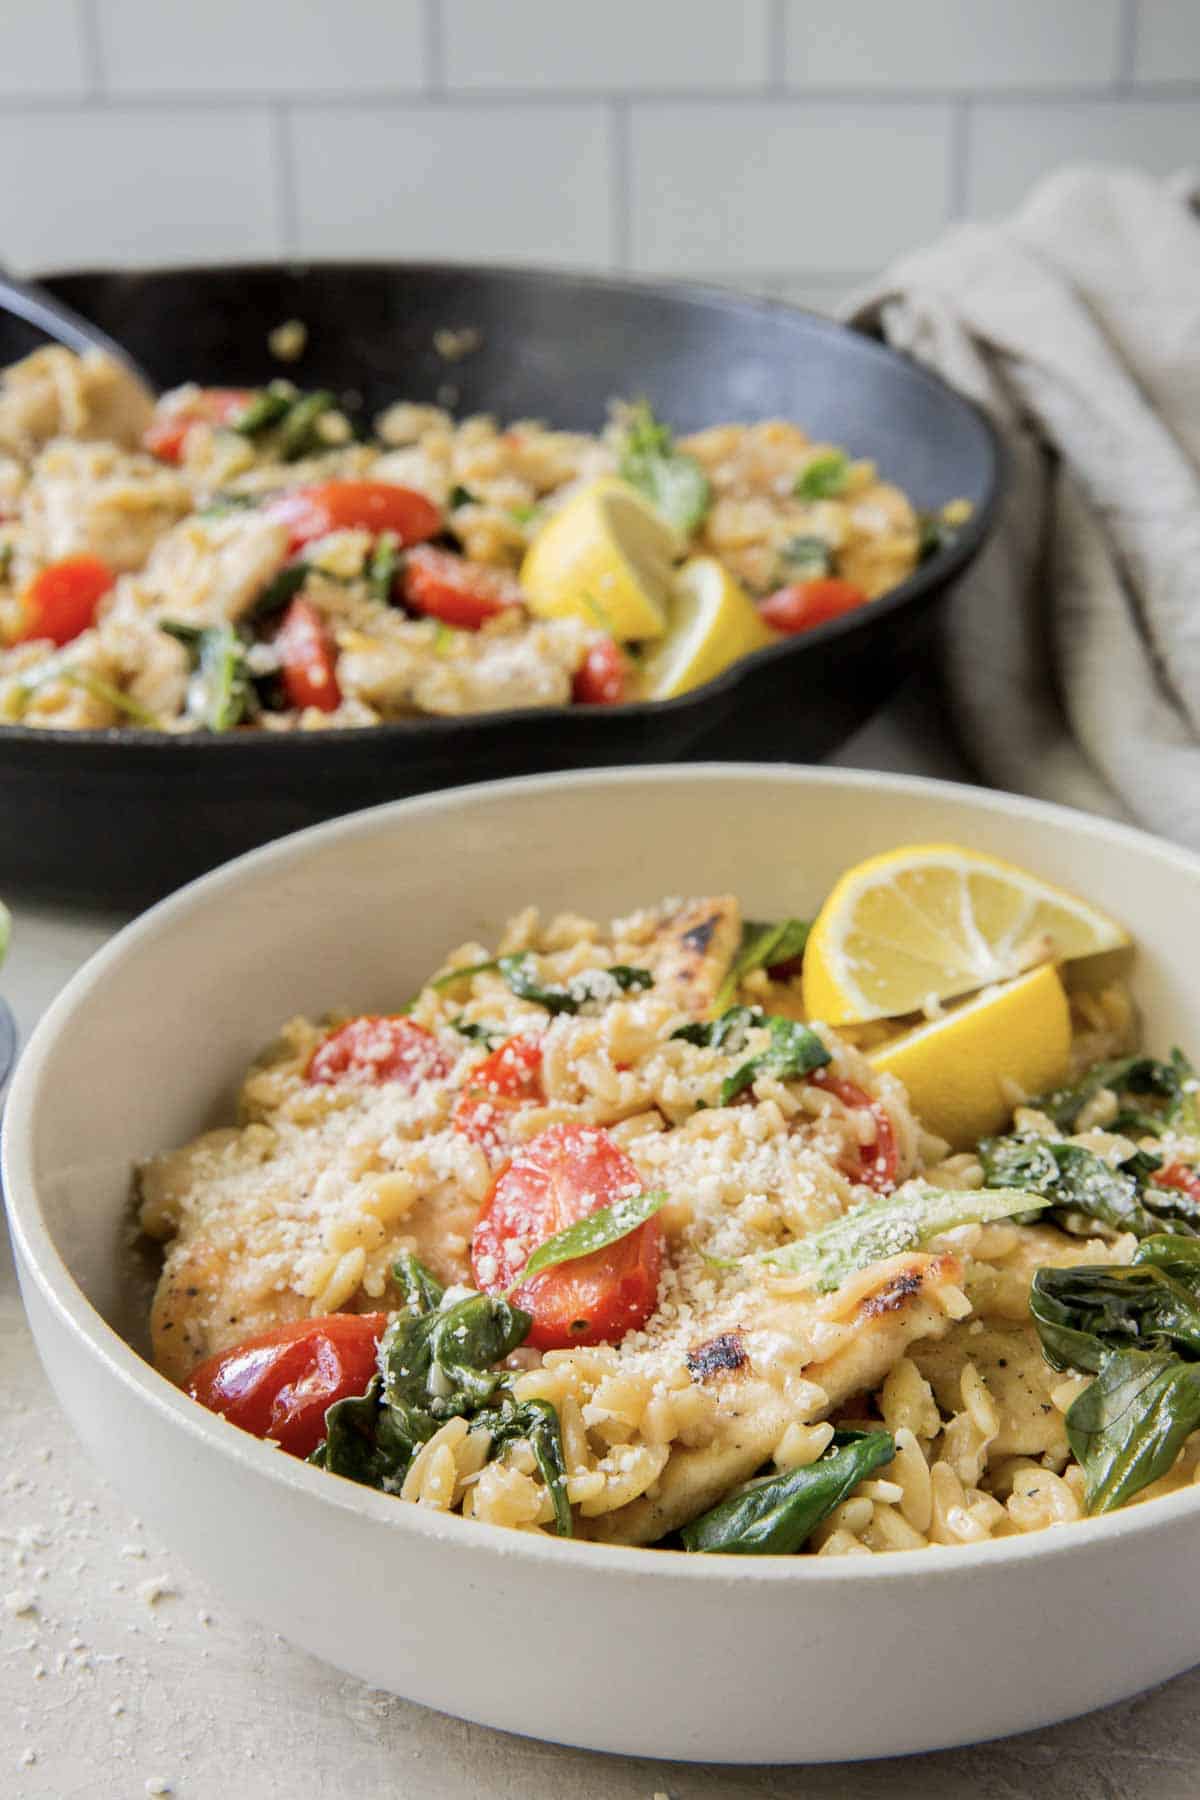 A serving of lemon chicken with orzo in a white bowl.